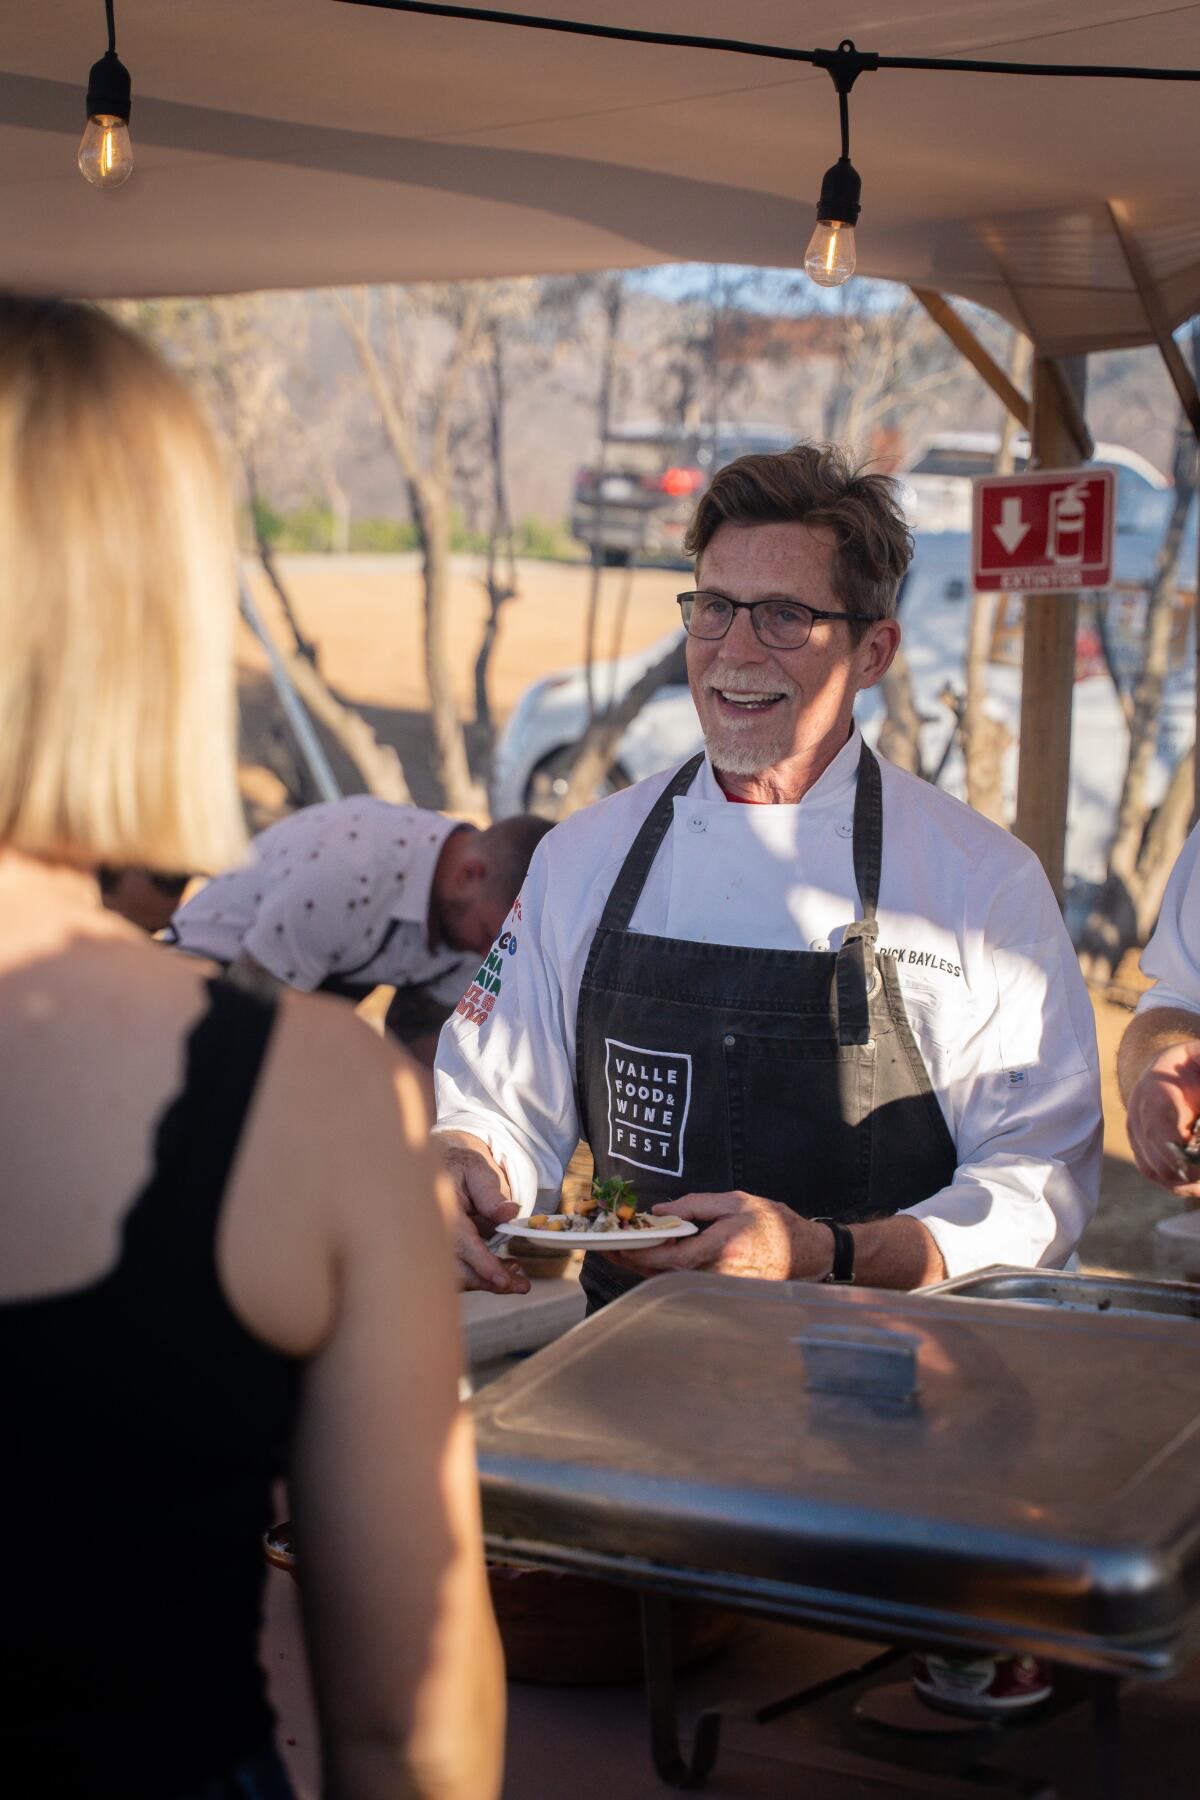 Chef Rick Bayless serving food to diners at the 2019 Valle Food & Wine Festival in Baja's Valle de Guadalupe.